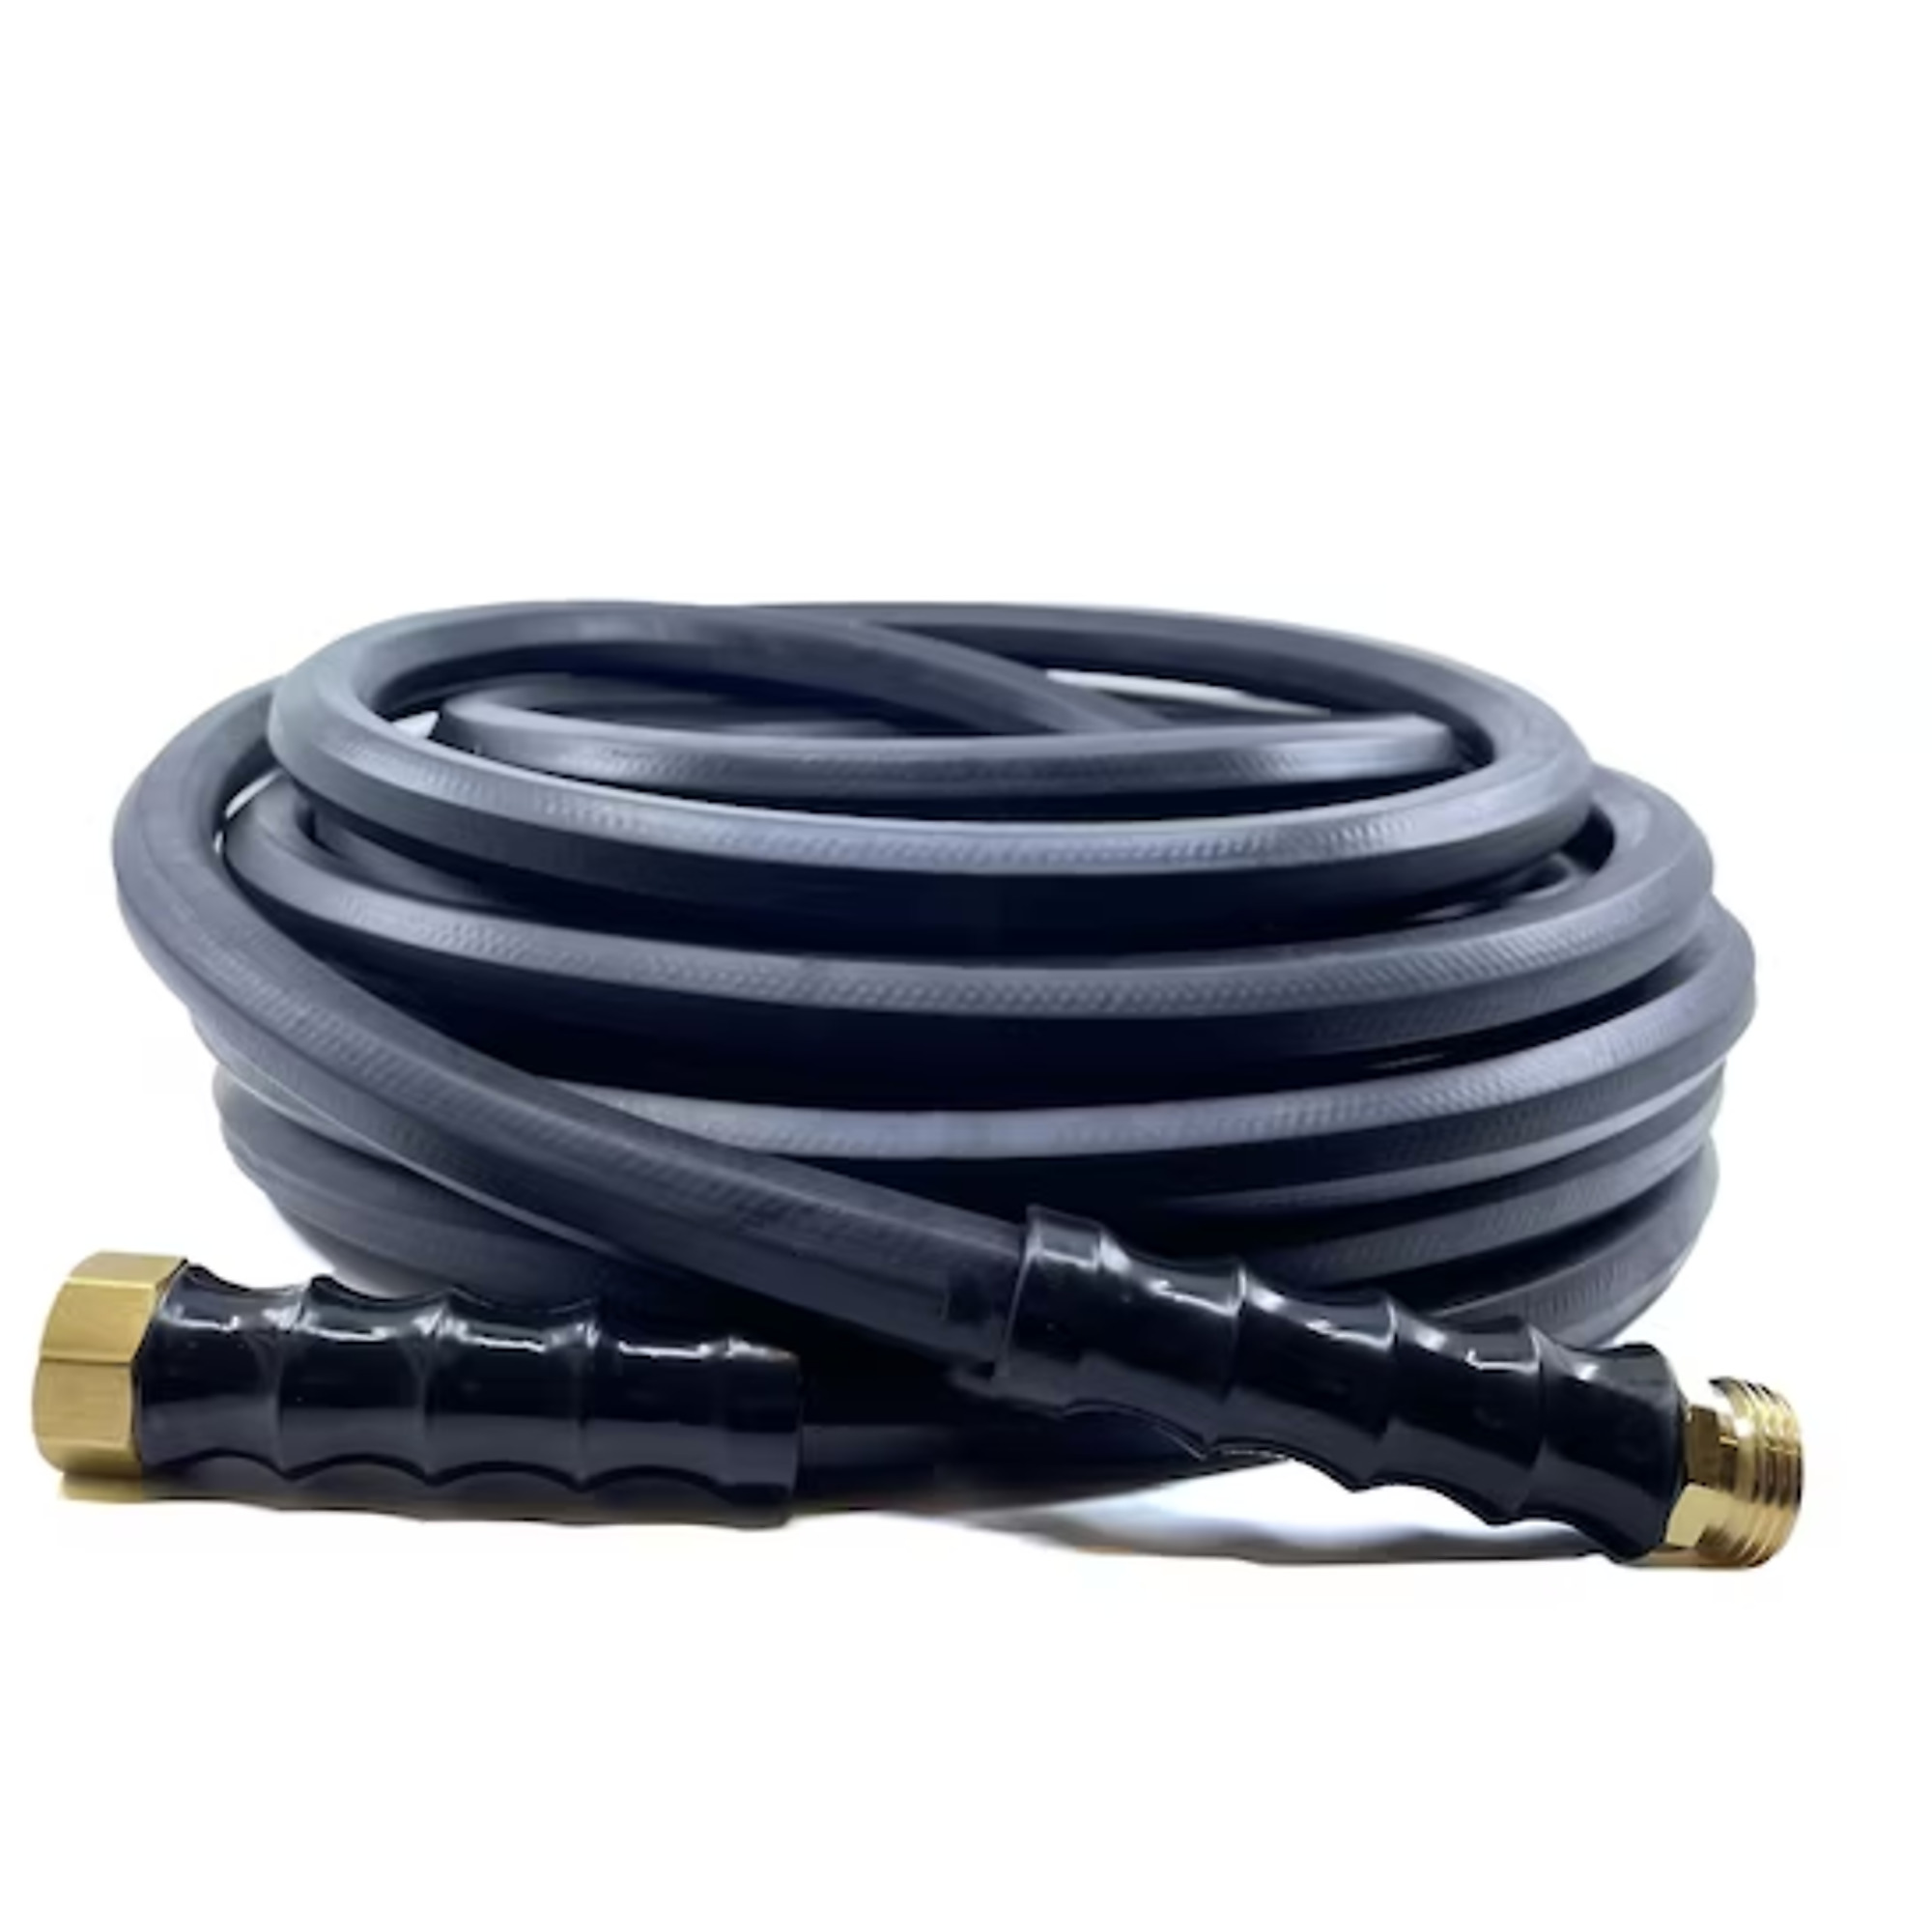 Strongway Rubber Garden Hose, 50ft., 5/8Inch Connection, 150 PSI